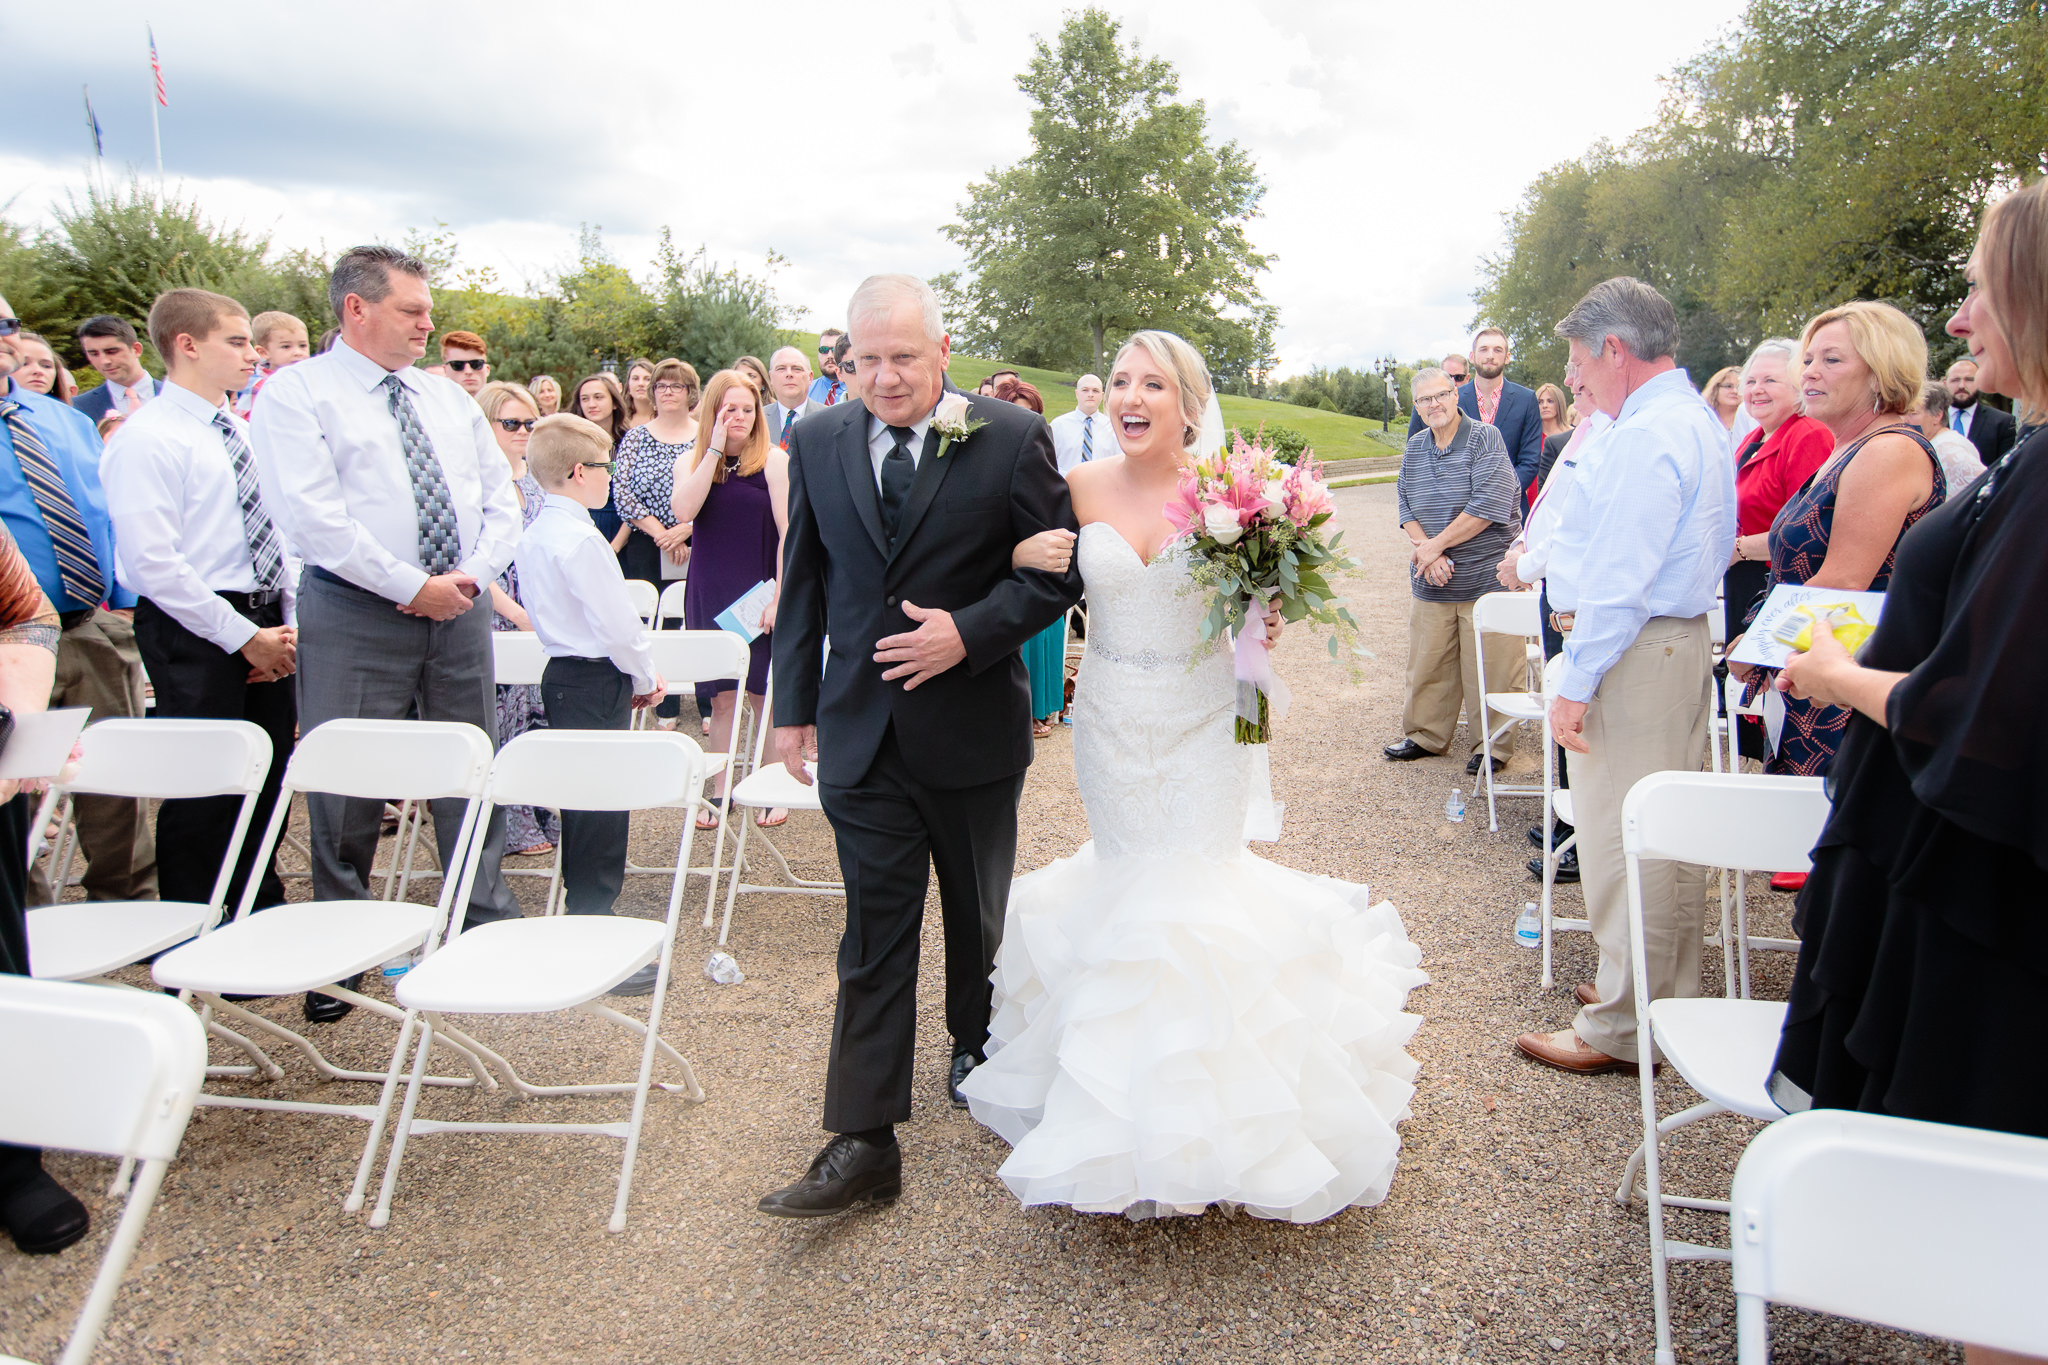 Bride excitedly approaches the groom at an outdoor wedding at Greystone Fields